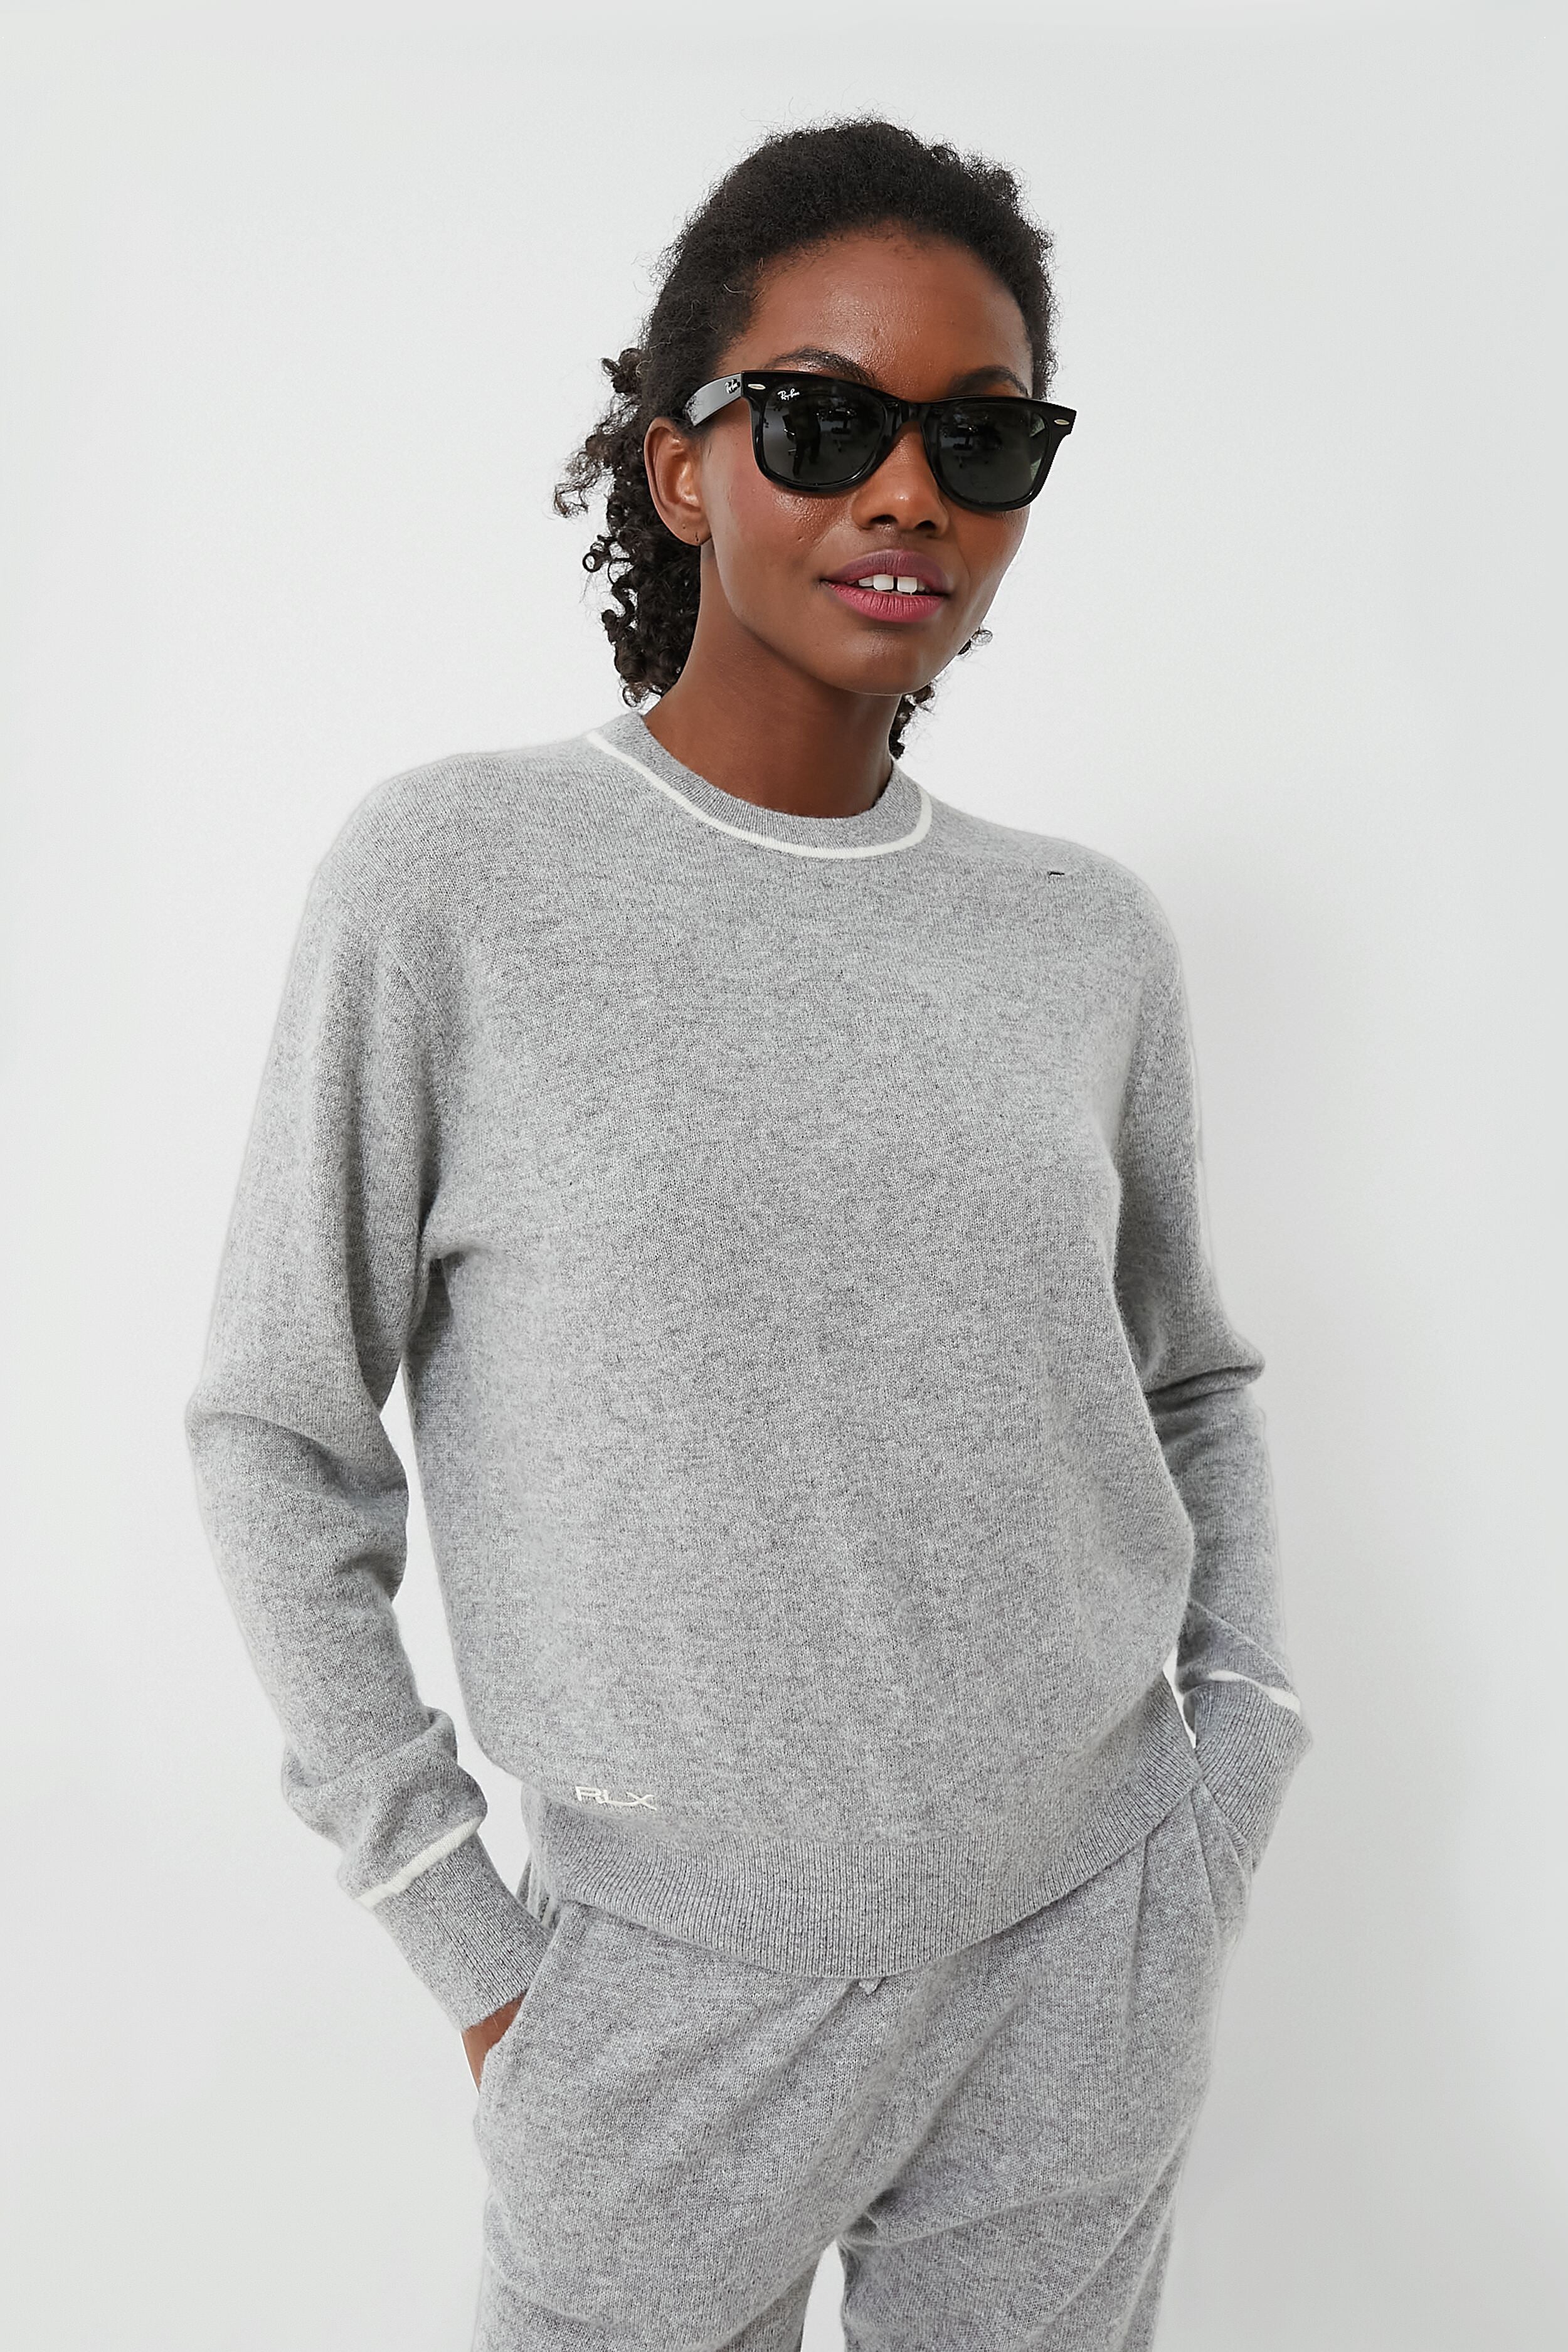 Cashmere must-haves for fall: Sweaters, pants, gloves, hats, and